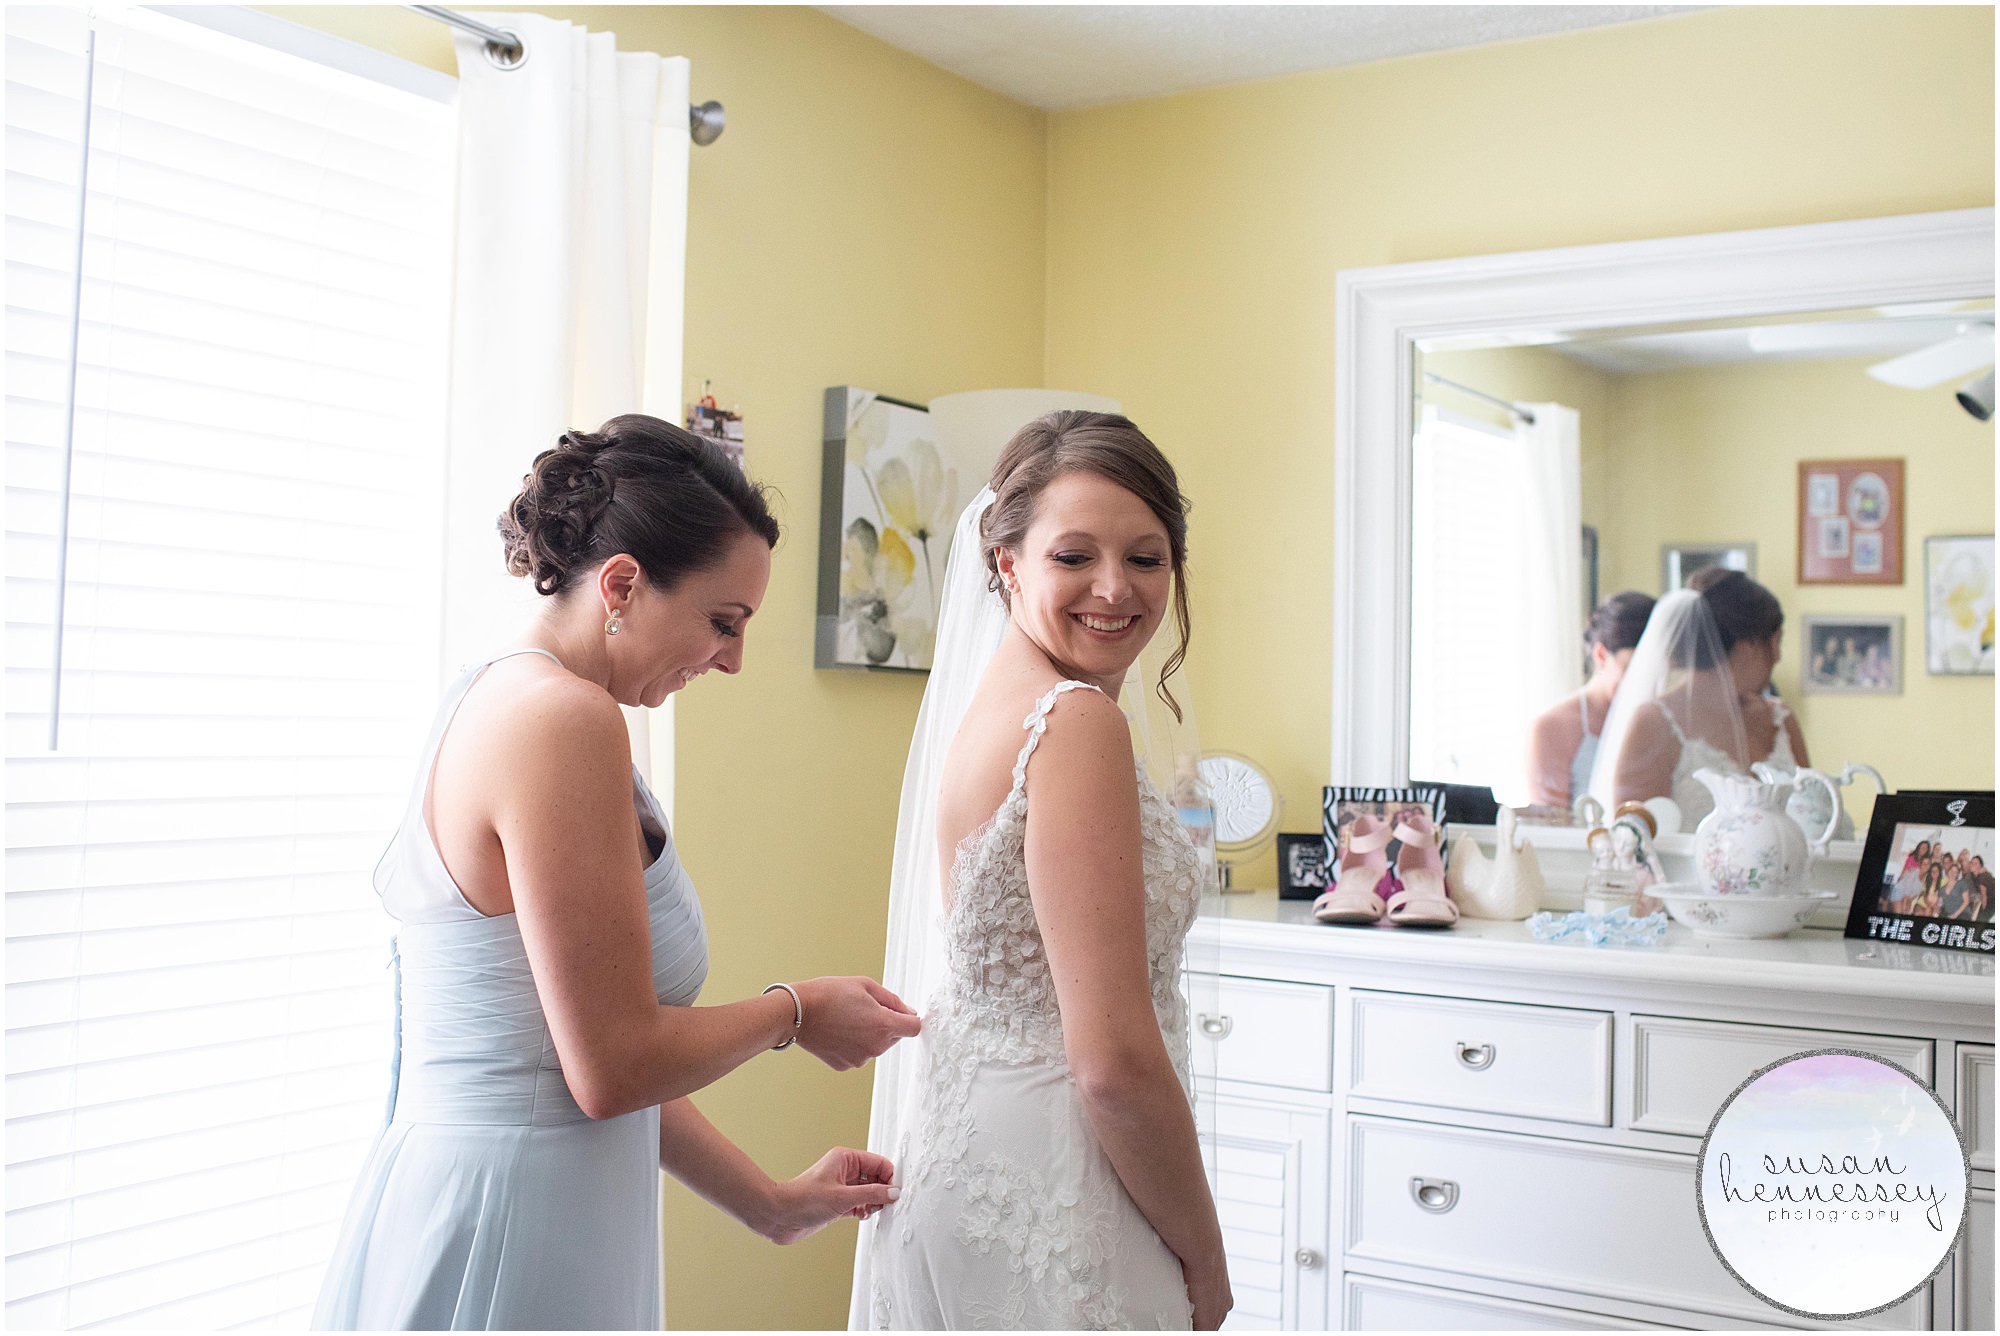 The maid of honor zips the bride into her wedding dress.